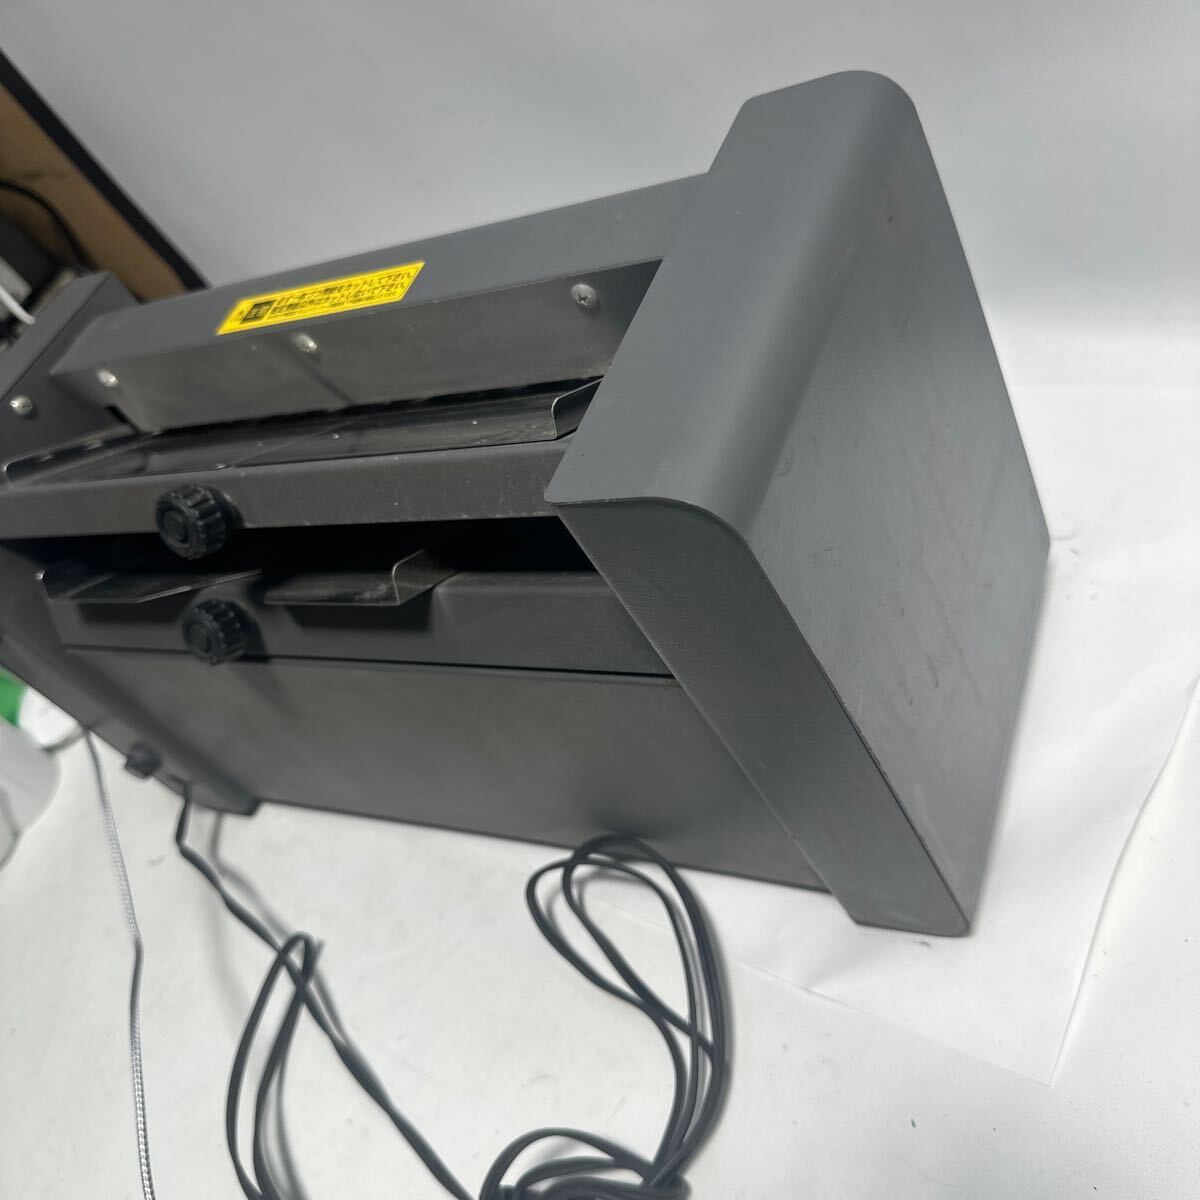 [2FQ31] corporation Just corporation electric business card cutter Vc2000 present condition body exhibition electrification verification only (240415)